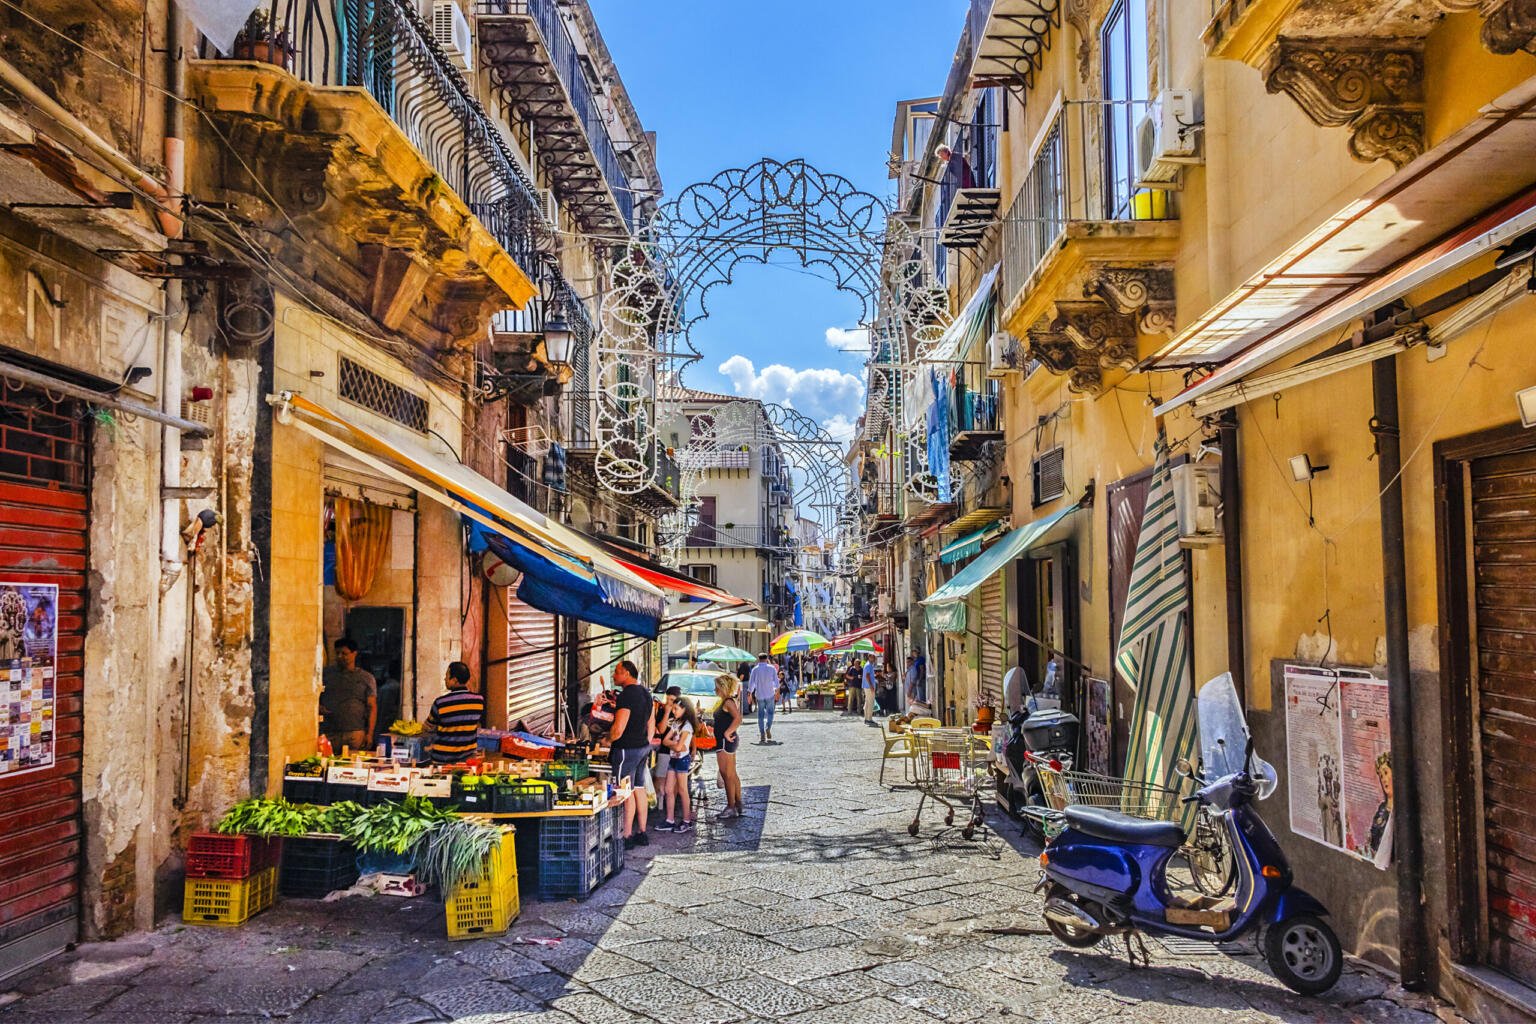 The streets of Palermo, Sicily